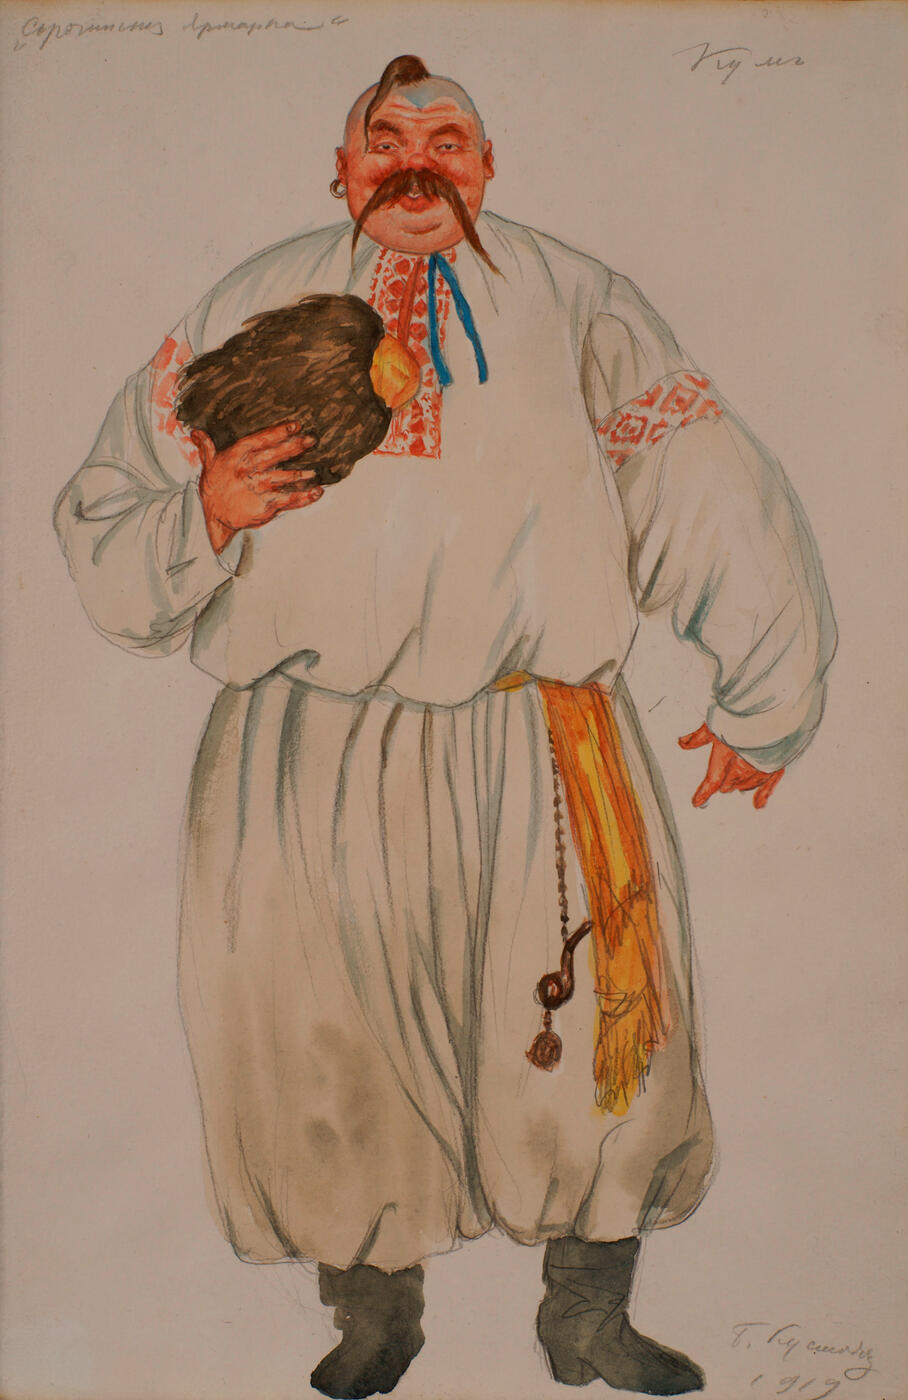 Costume Design for Kum from "The Fair at Sorochyntsi" by Modest Mussorgsky